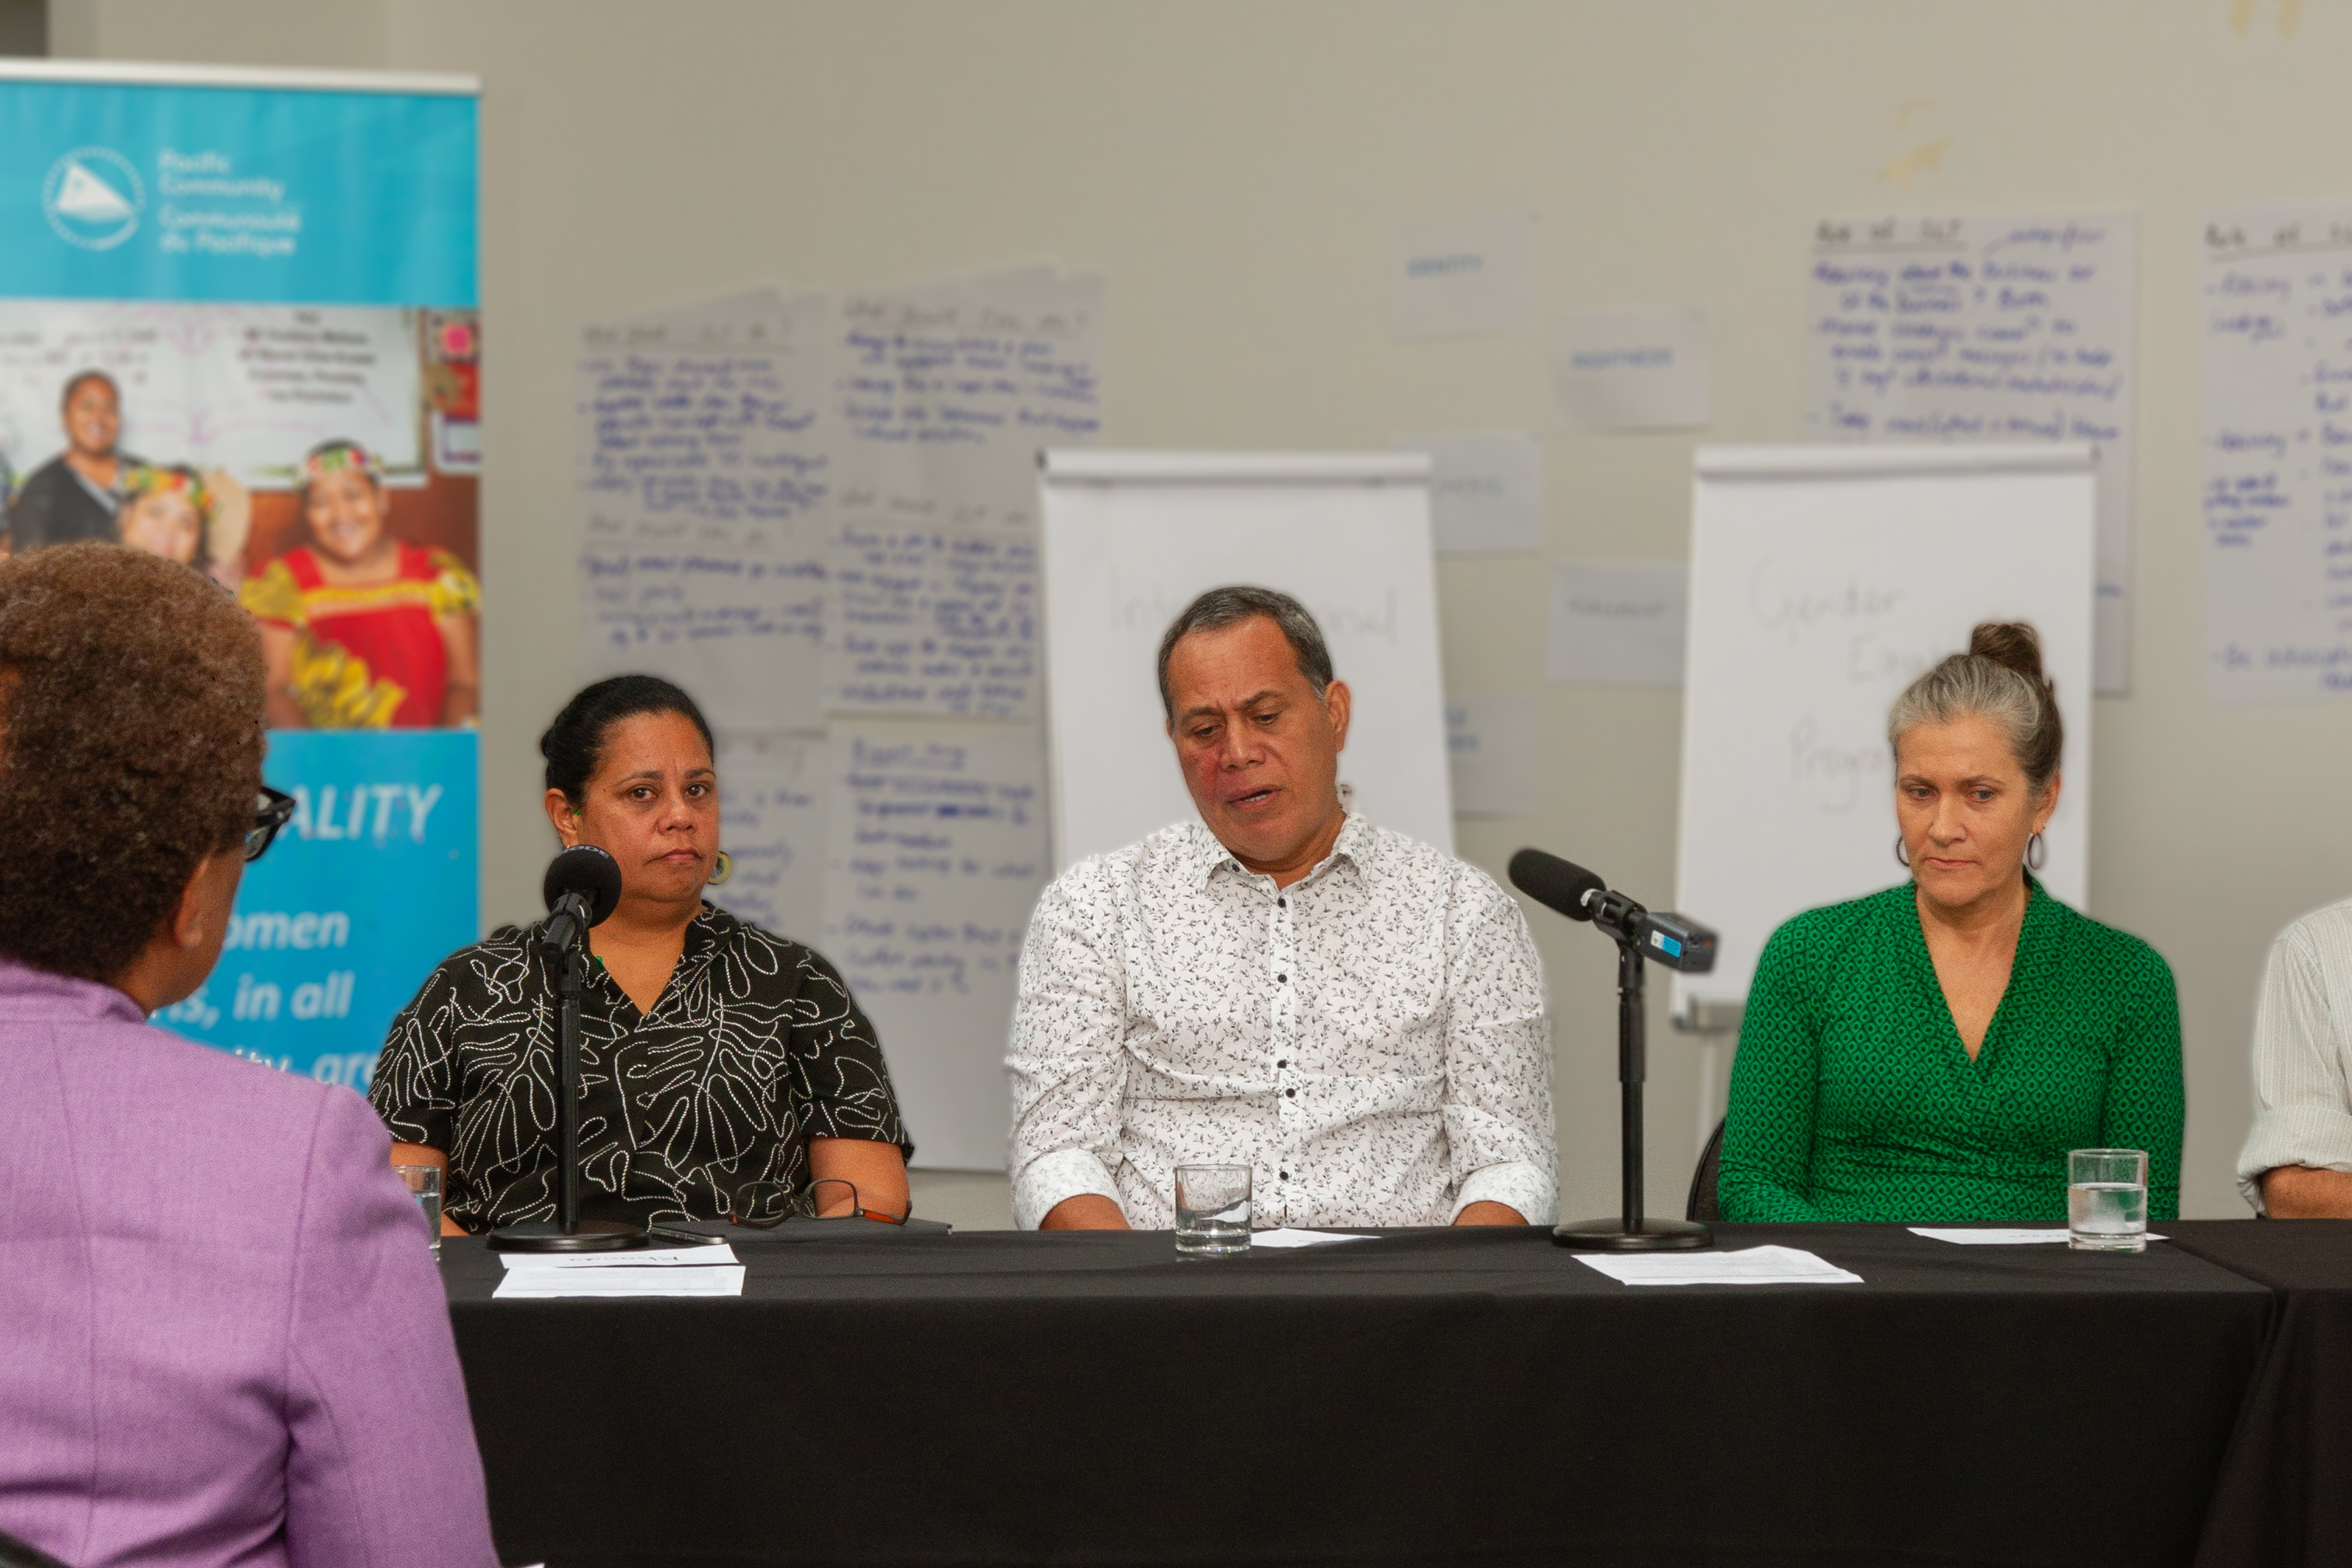 Panellists at the One-SPC Event for International Women’s Day shared specific examples of gender equality approaches being integrated into SPC programming across the Pacific region, along with insights and lessons learned.